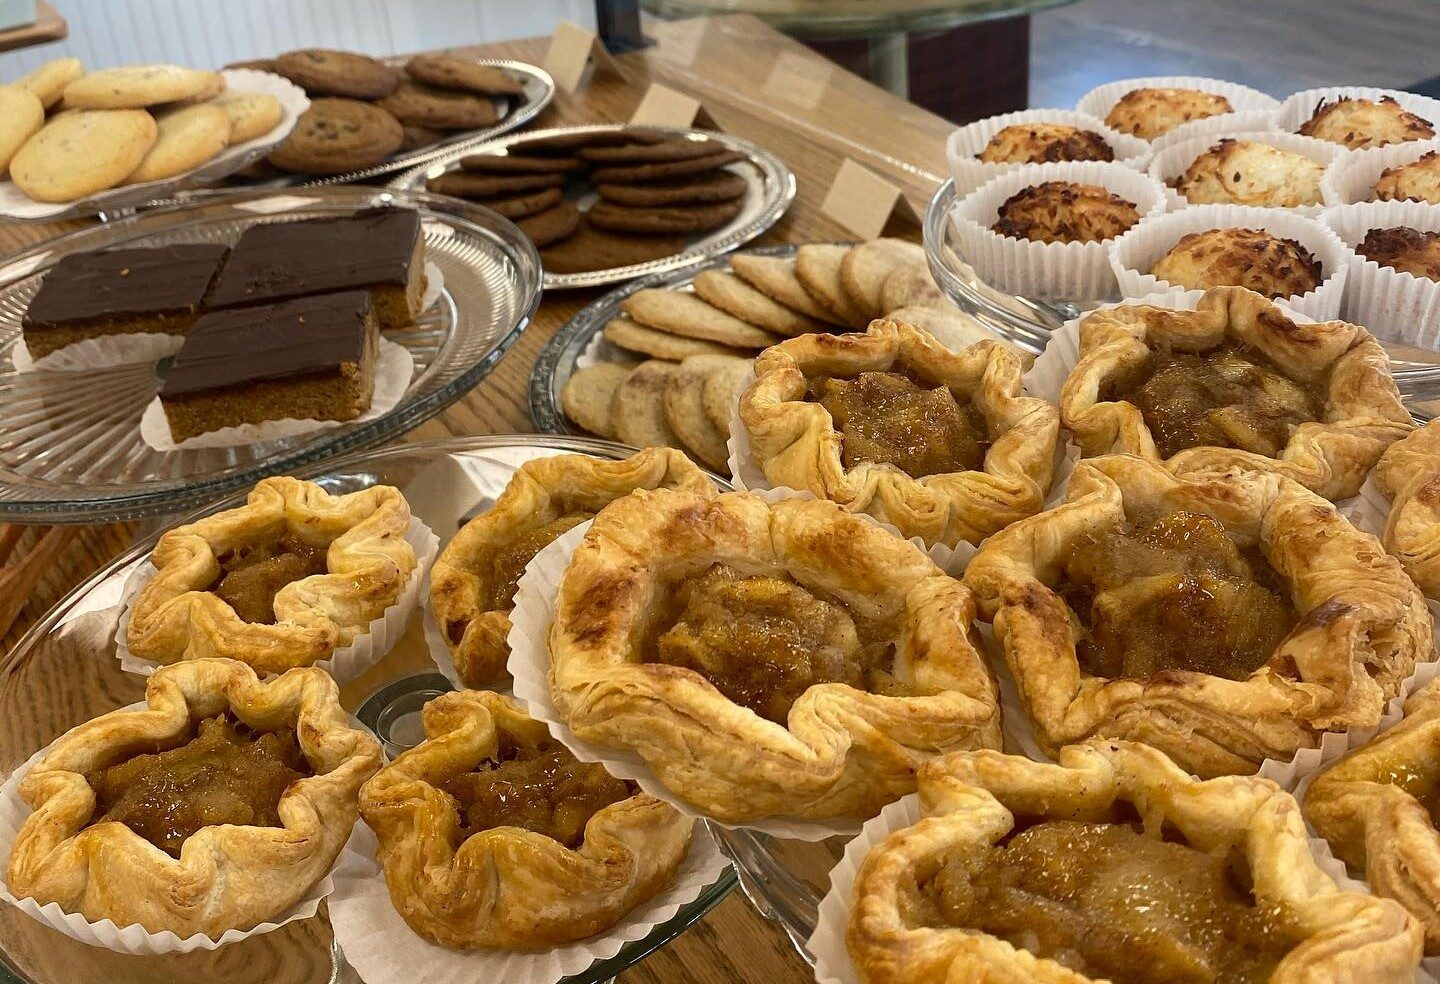 Several baked goods on display at Domenique's Bakery along the Lewis and Clark Historic Trail